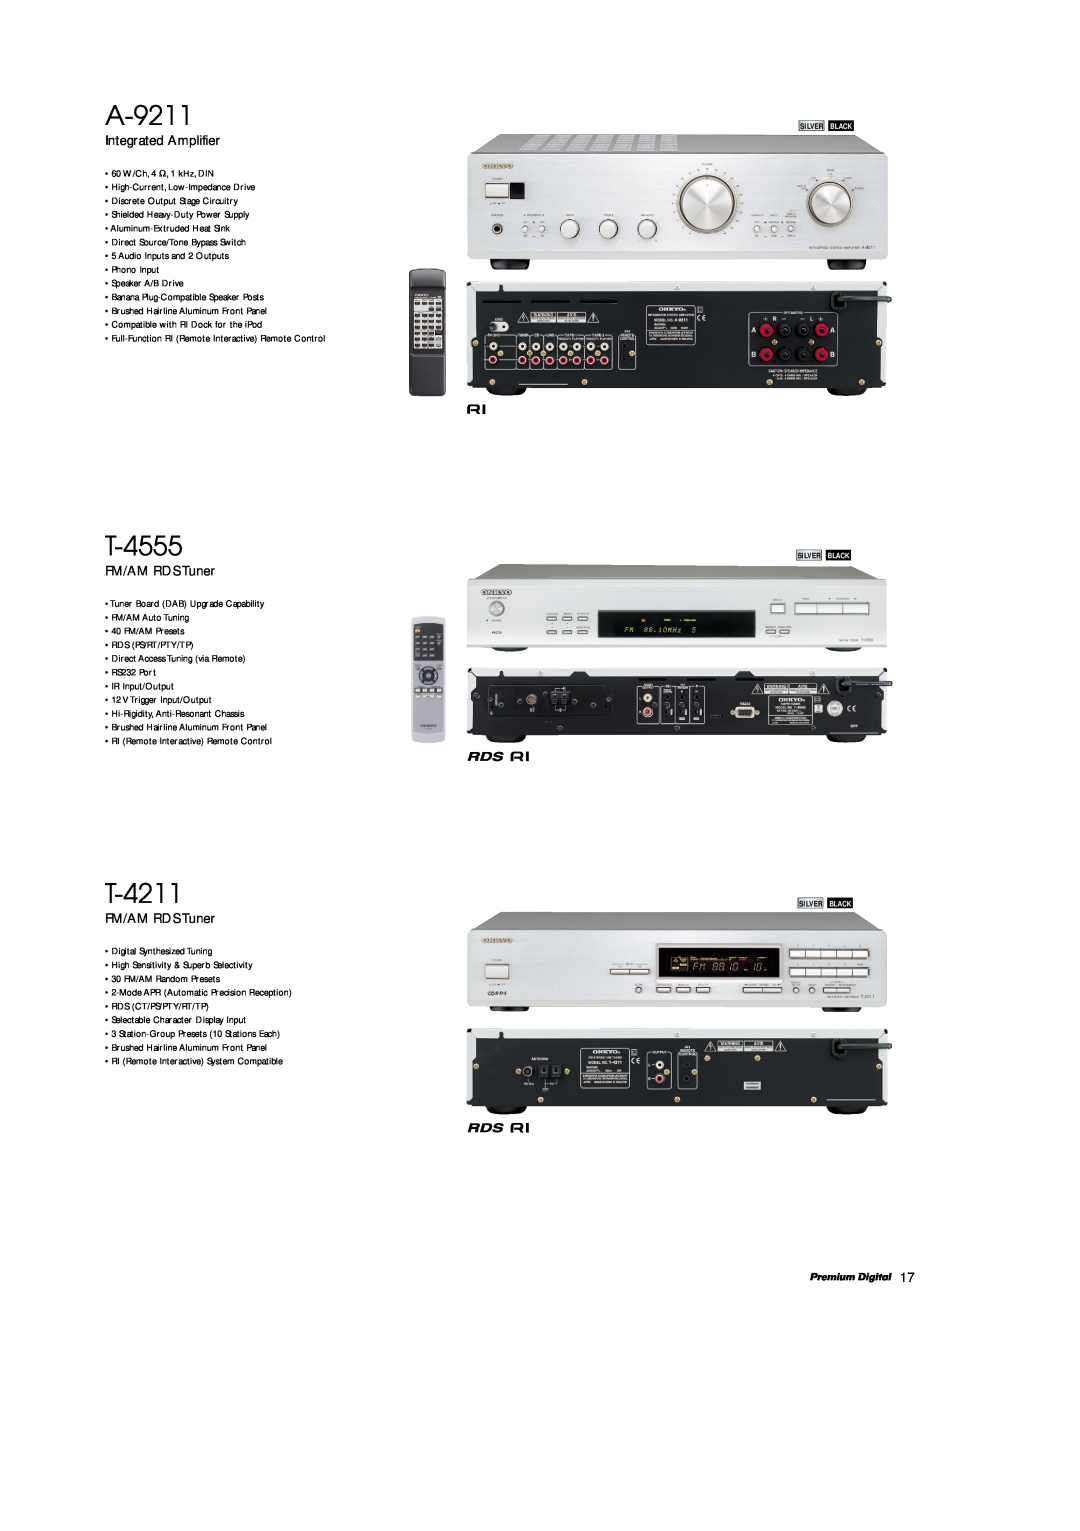 Onkyo A-9211 manual T-4555, T-4211, Integrated Amplifier, FM/AM RDS Tuner 